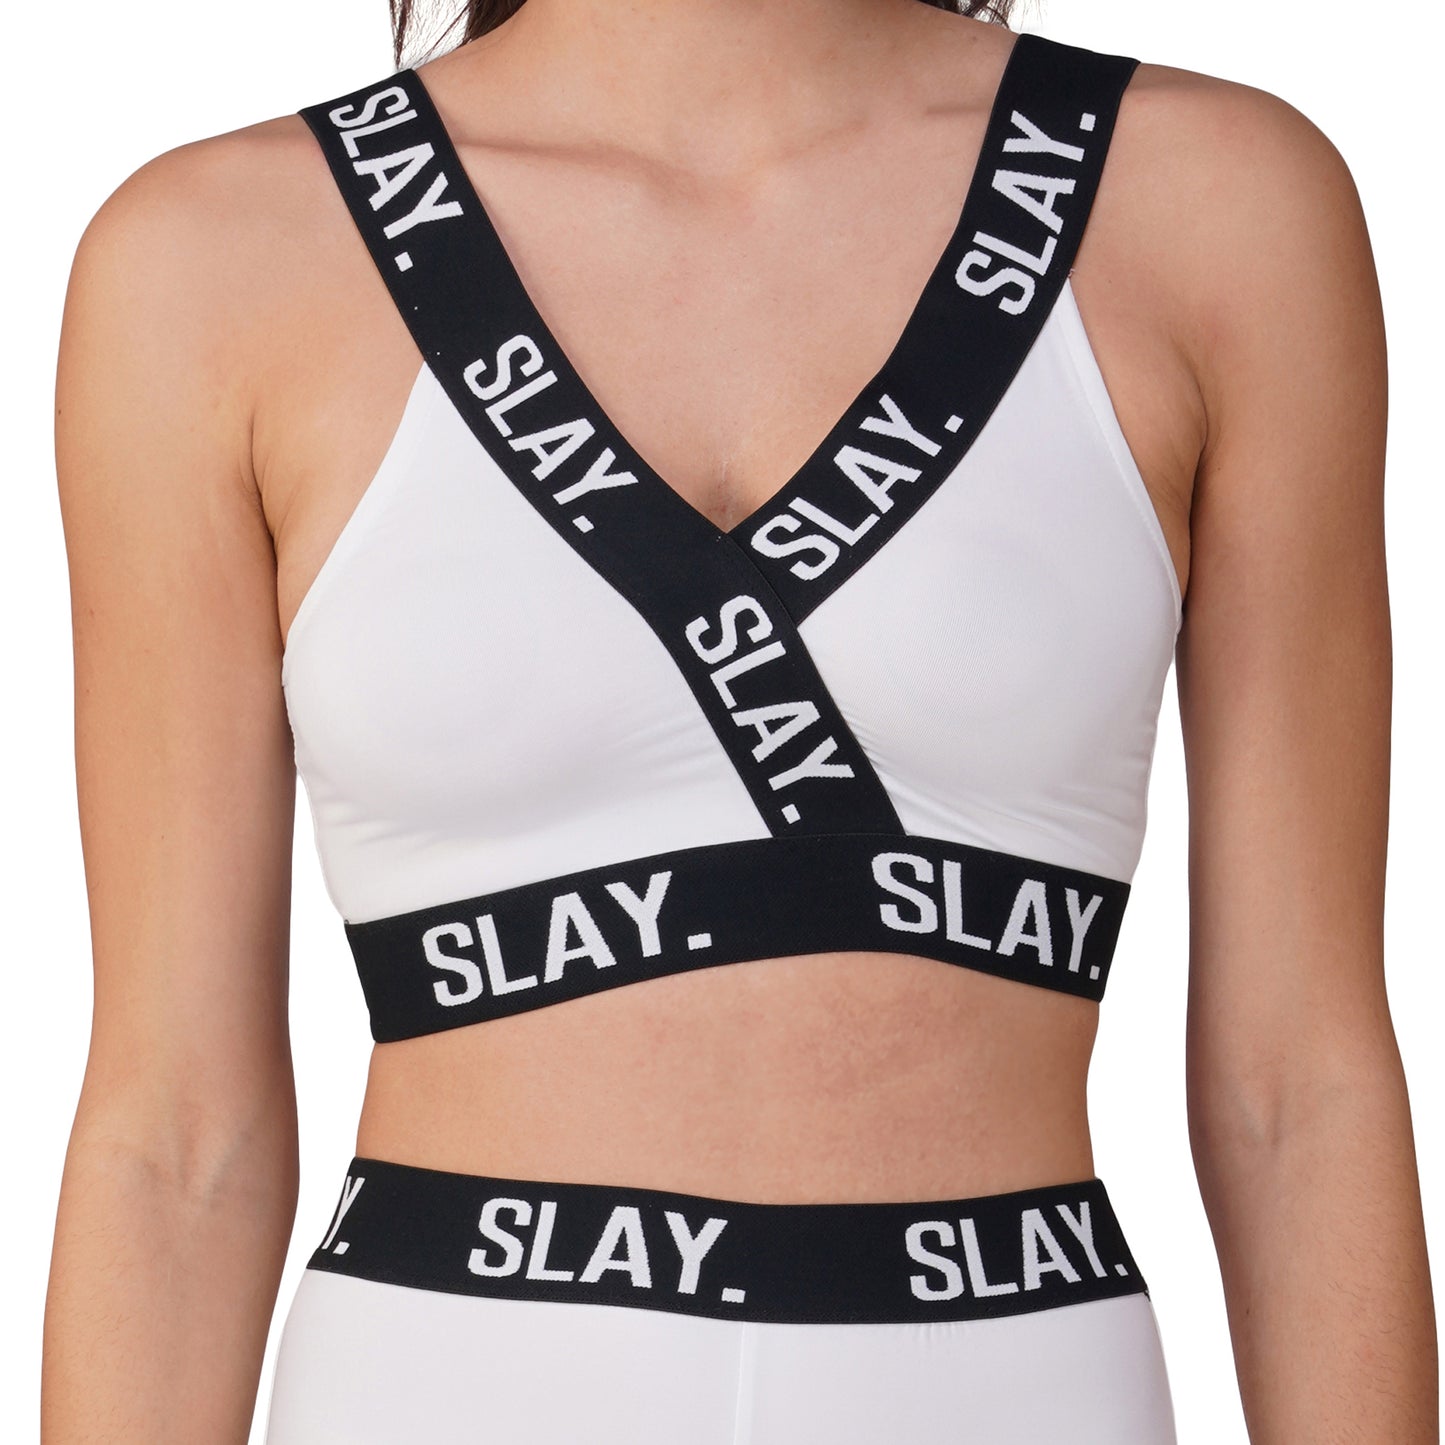 SLAY. Sport Women's Activewear Full Sleeves Crop Top And Pants Co-ord Set White